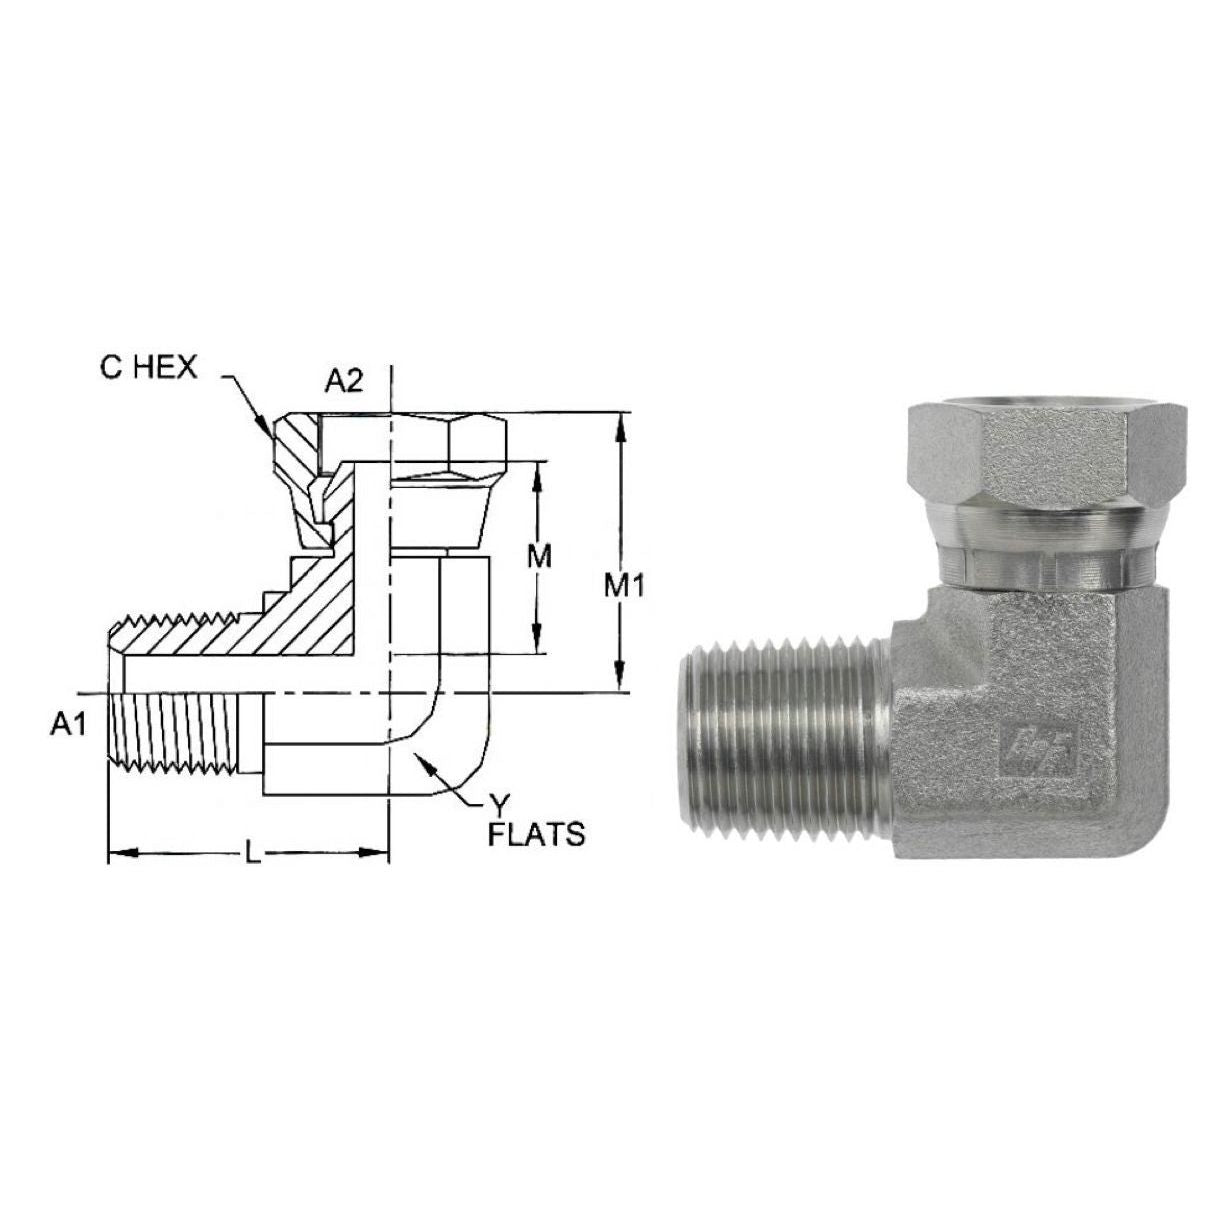 1501-02-02-SS : OneHydraulics 90-Degree Elbow, 0.125 (1/8) Male NPT x 0.125 (1/8) Female NPT Swivel, Stainless Steel, 6000psi